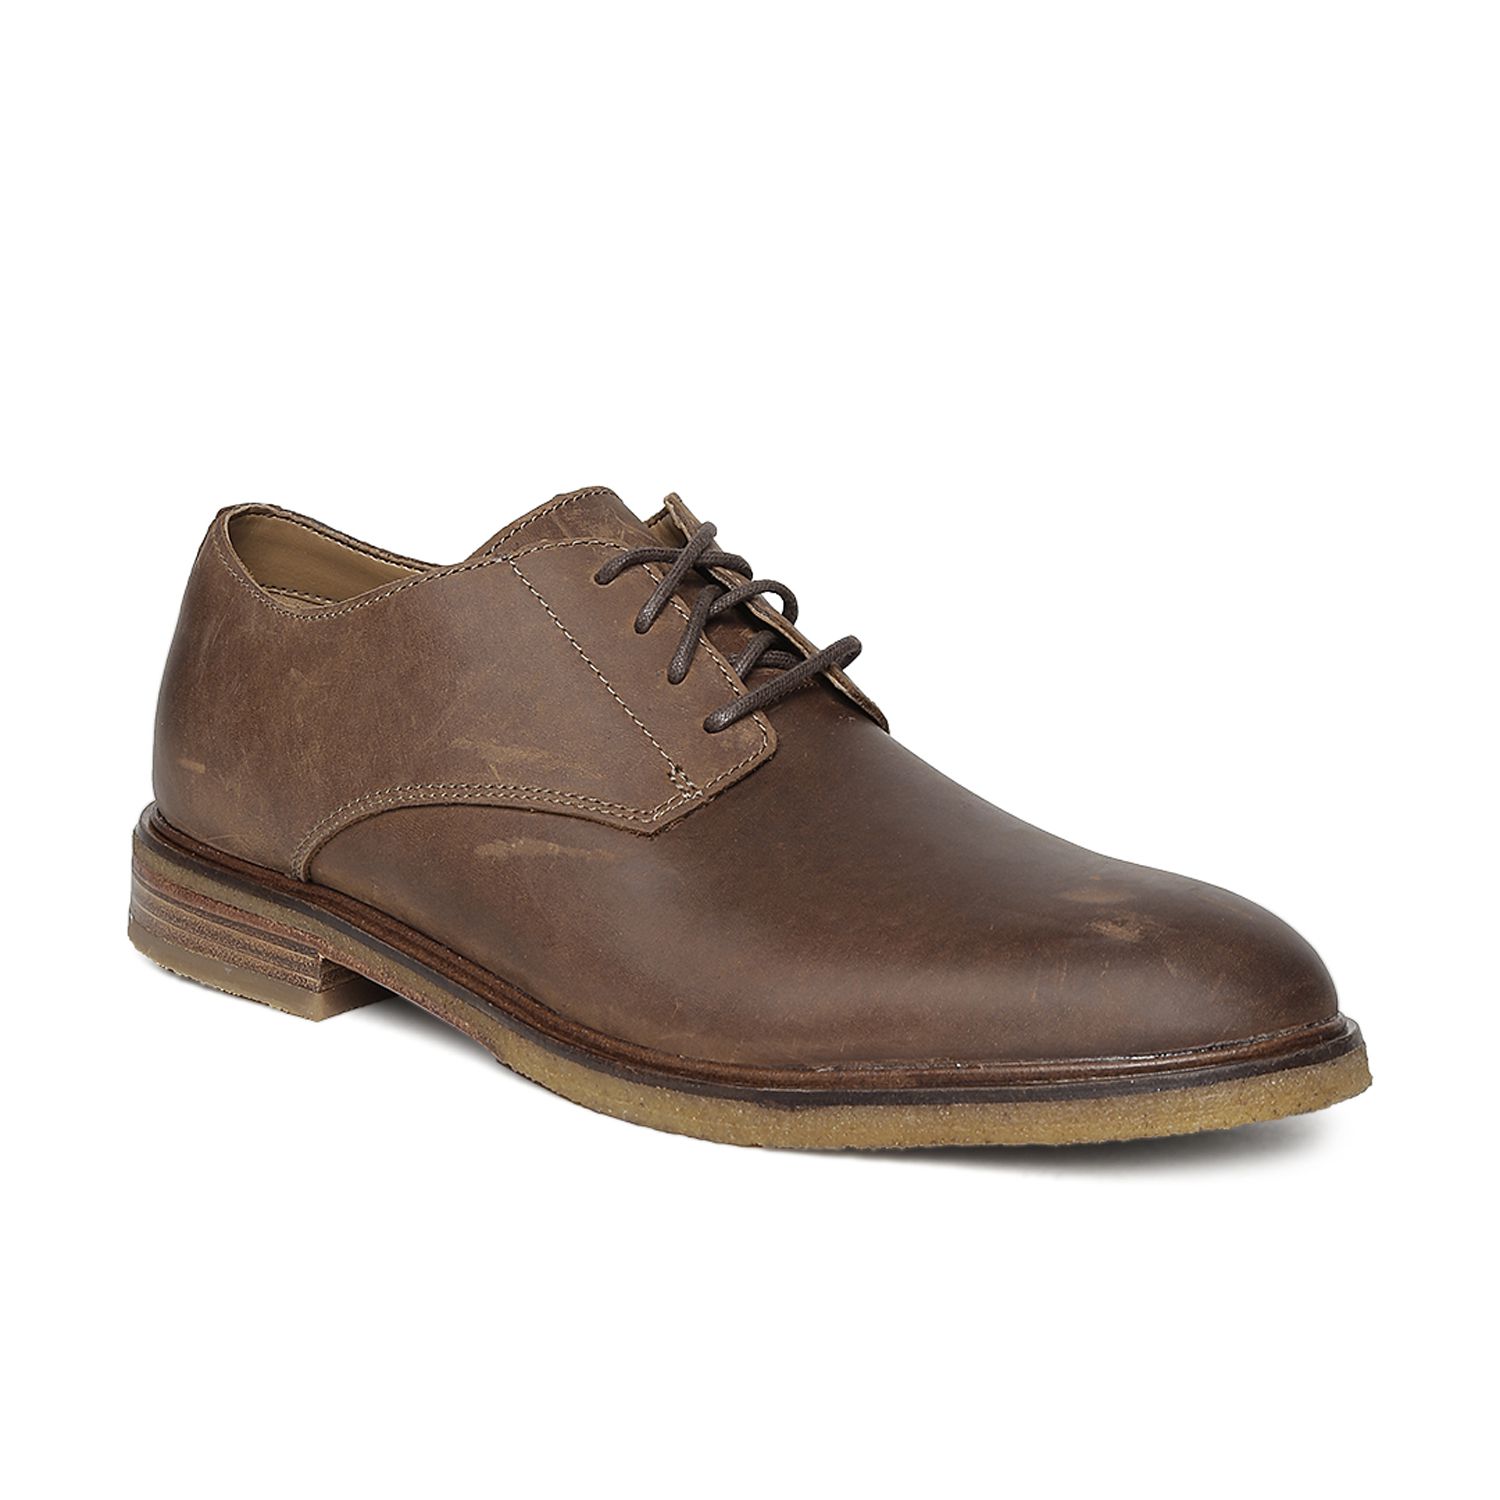 Clarks Derby Genuine Leather Tan Formal Shoes Price in India- Buy ...